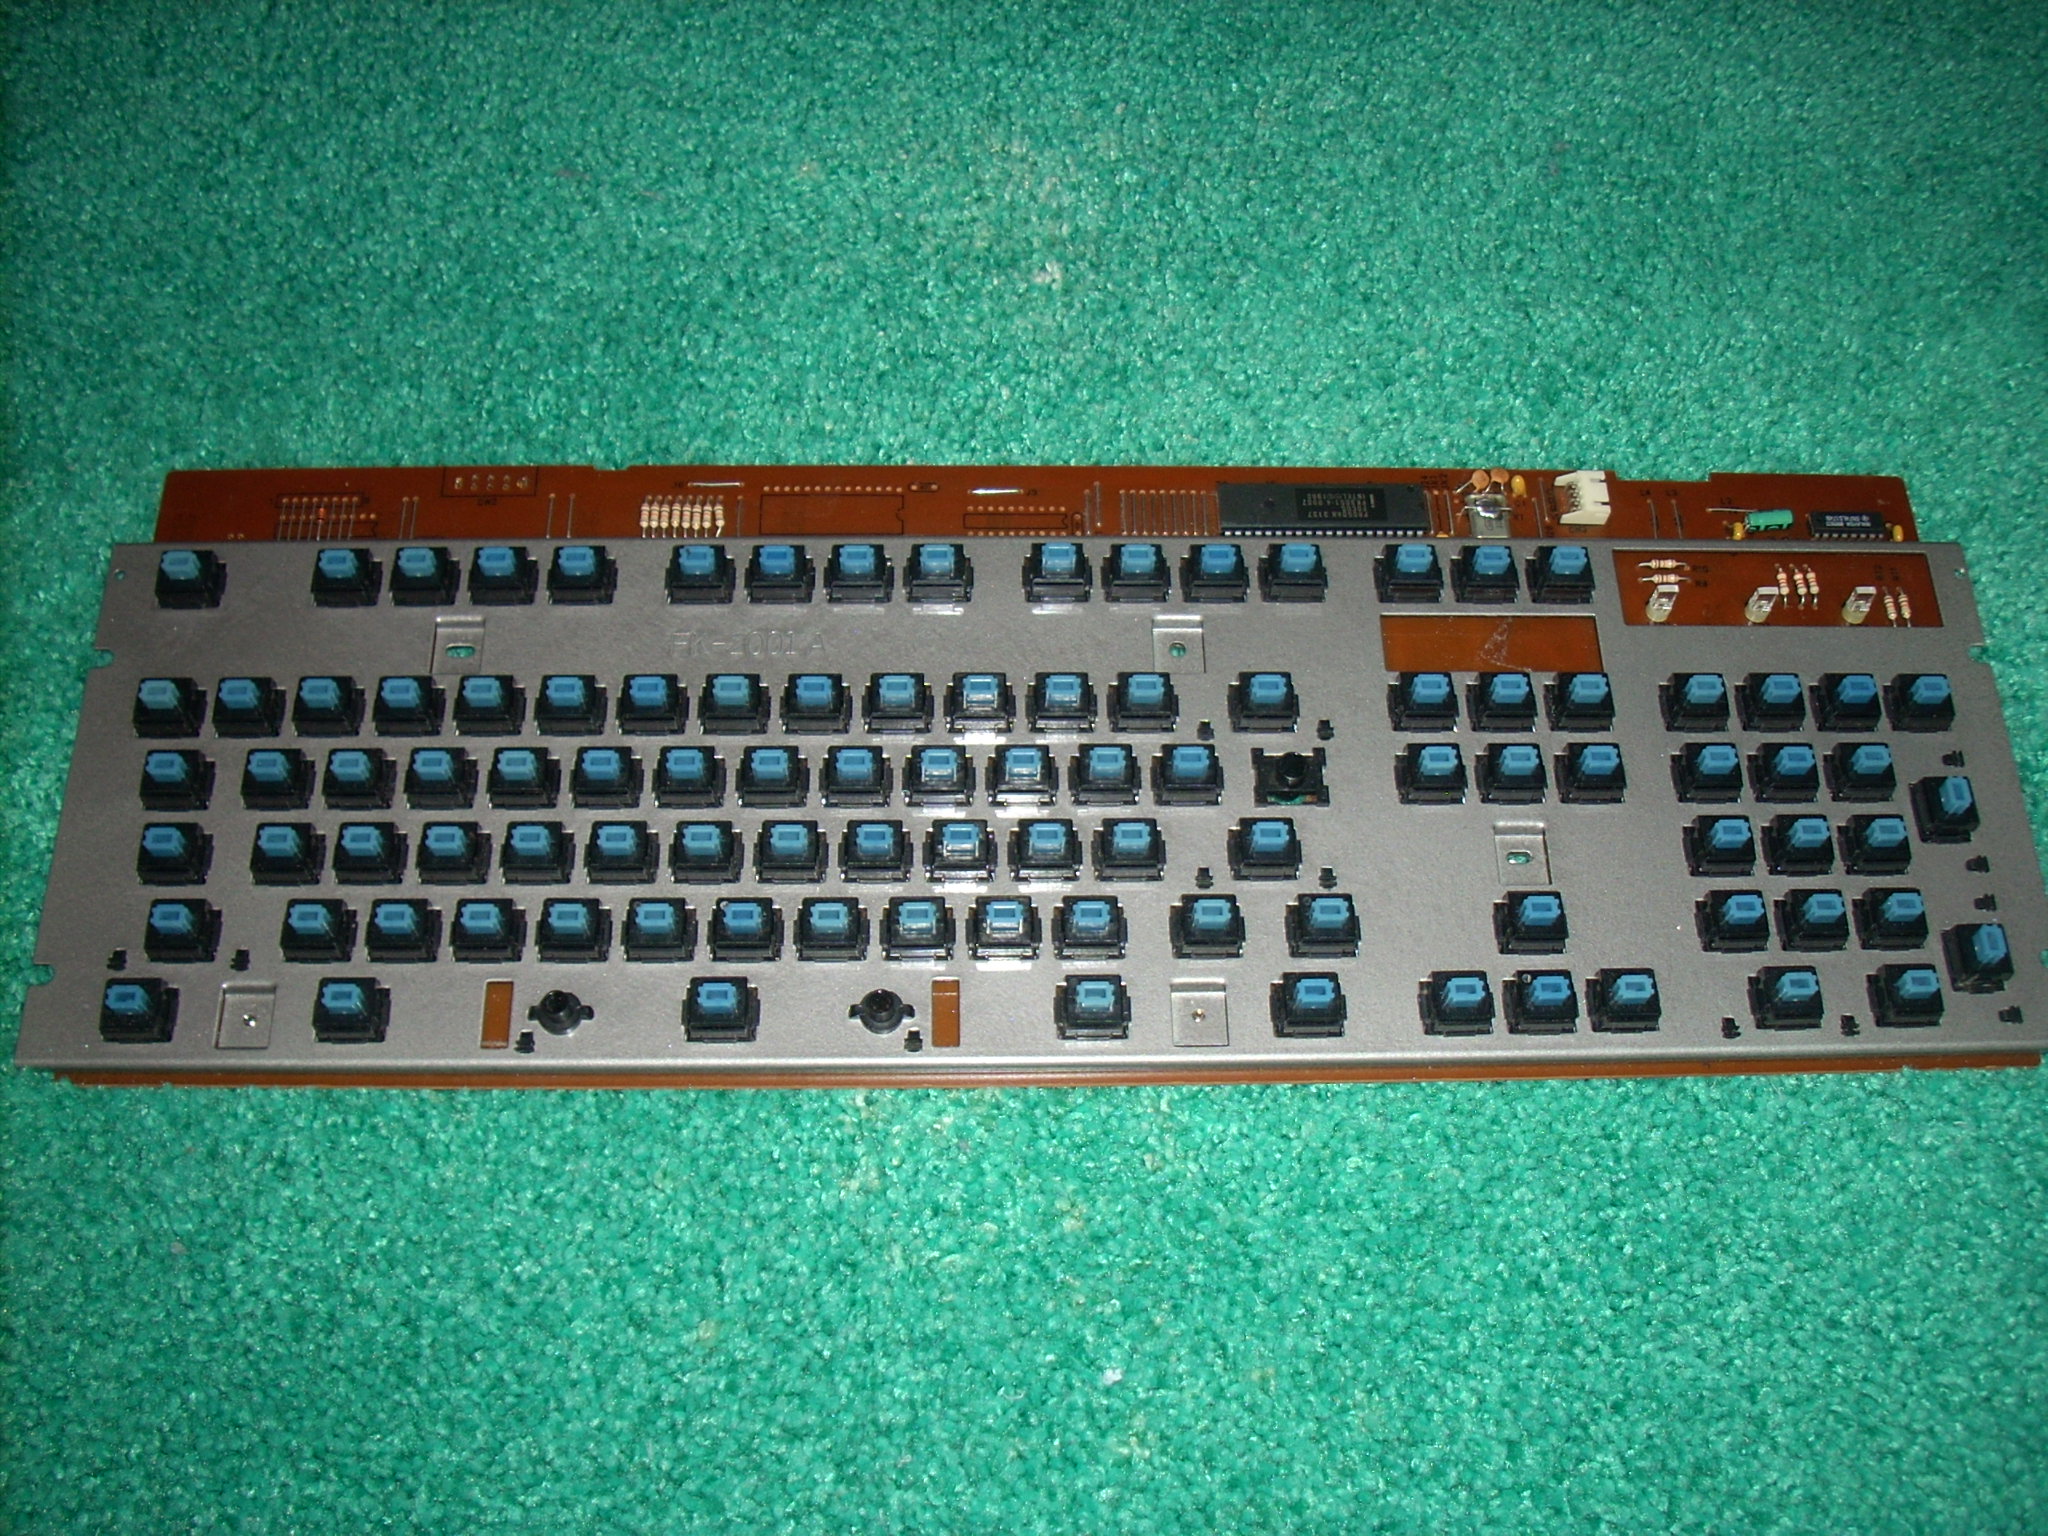 PCB and plate reassembled